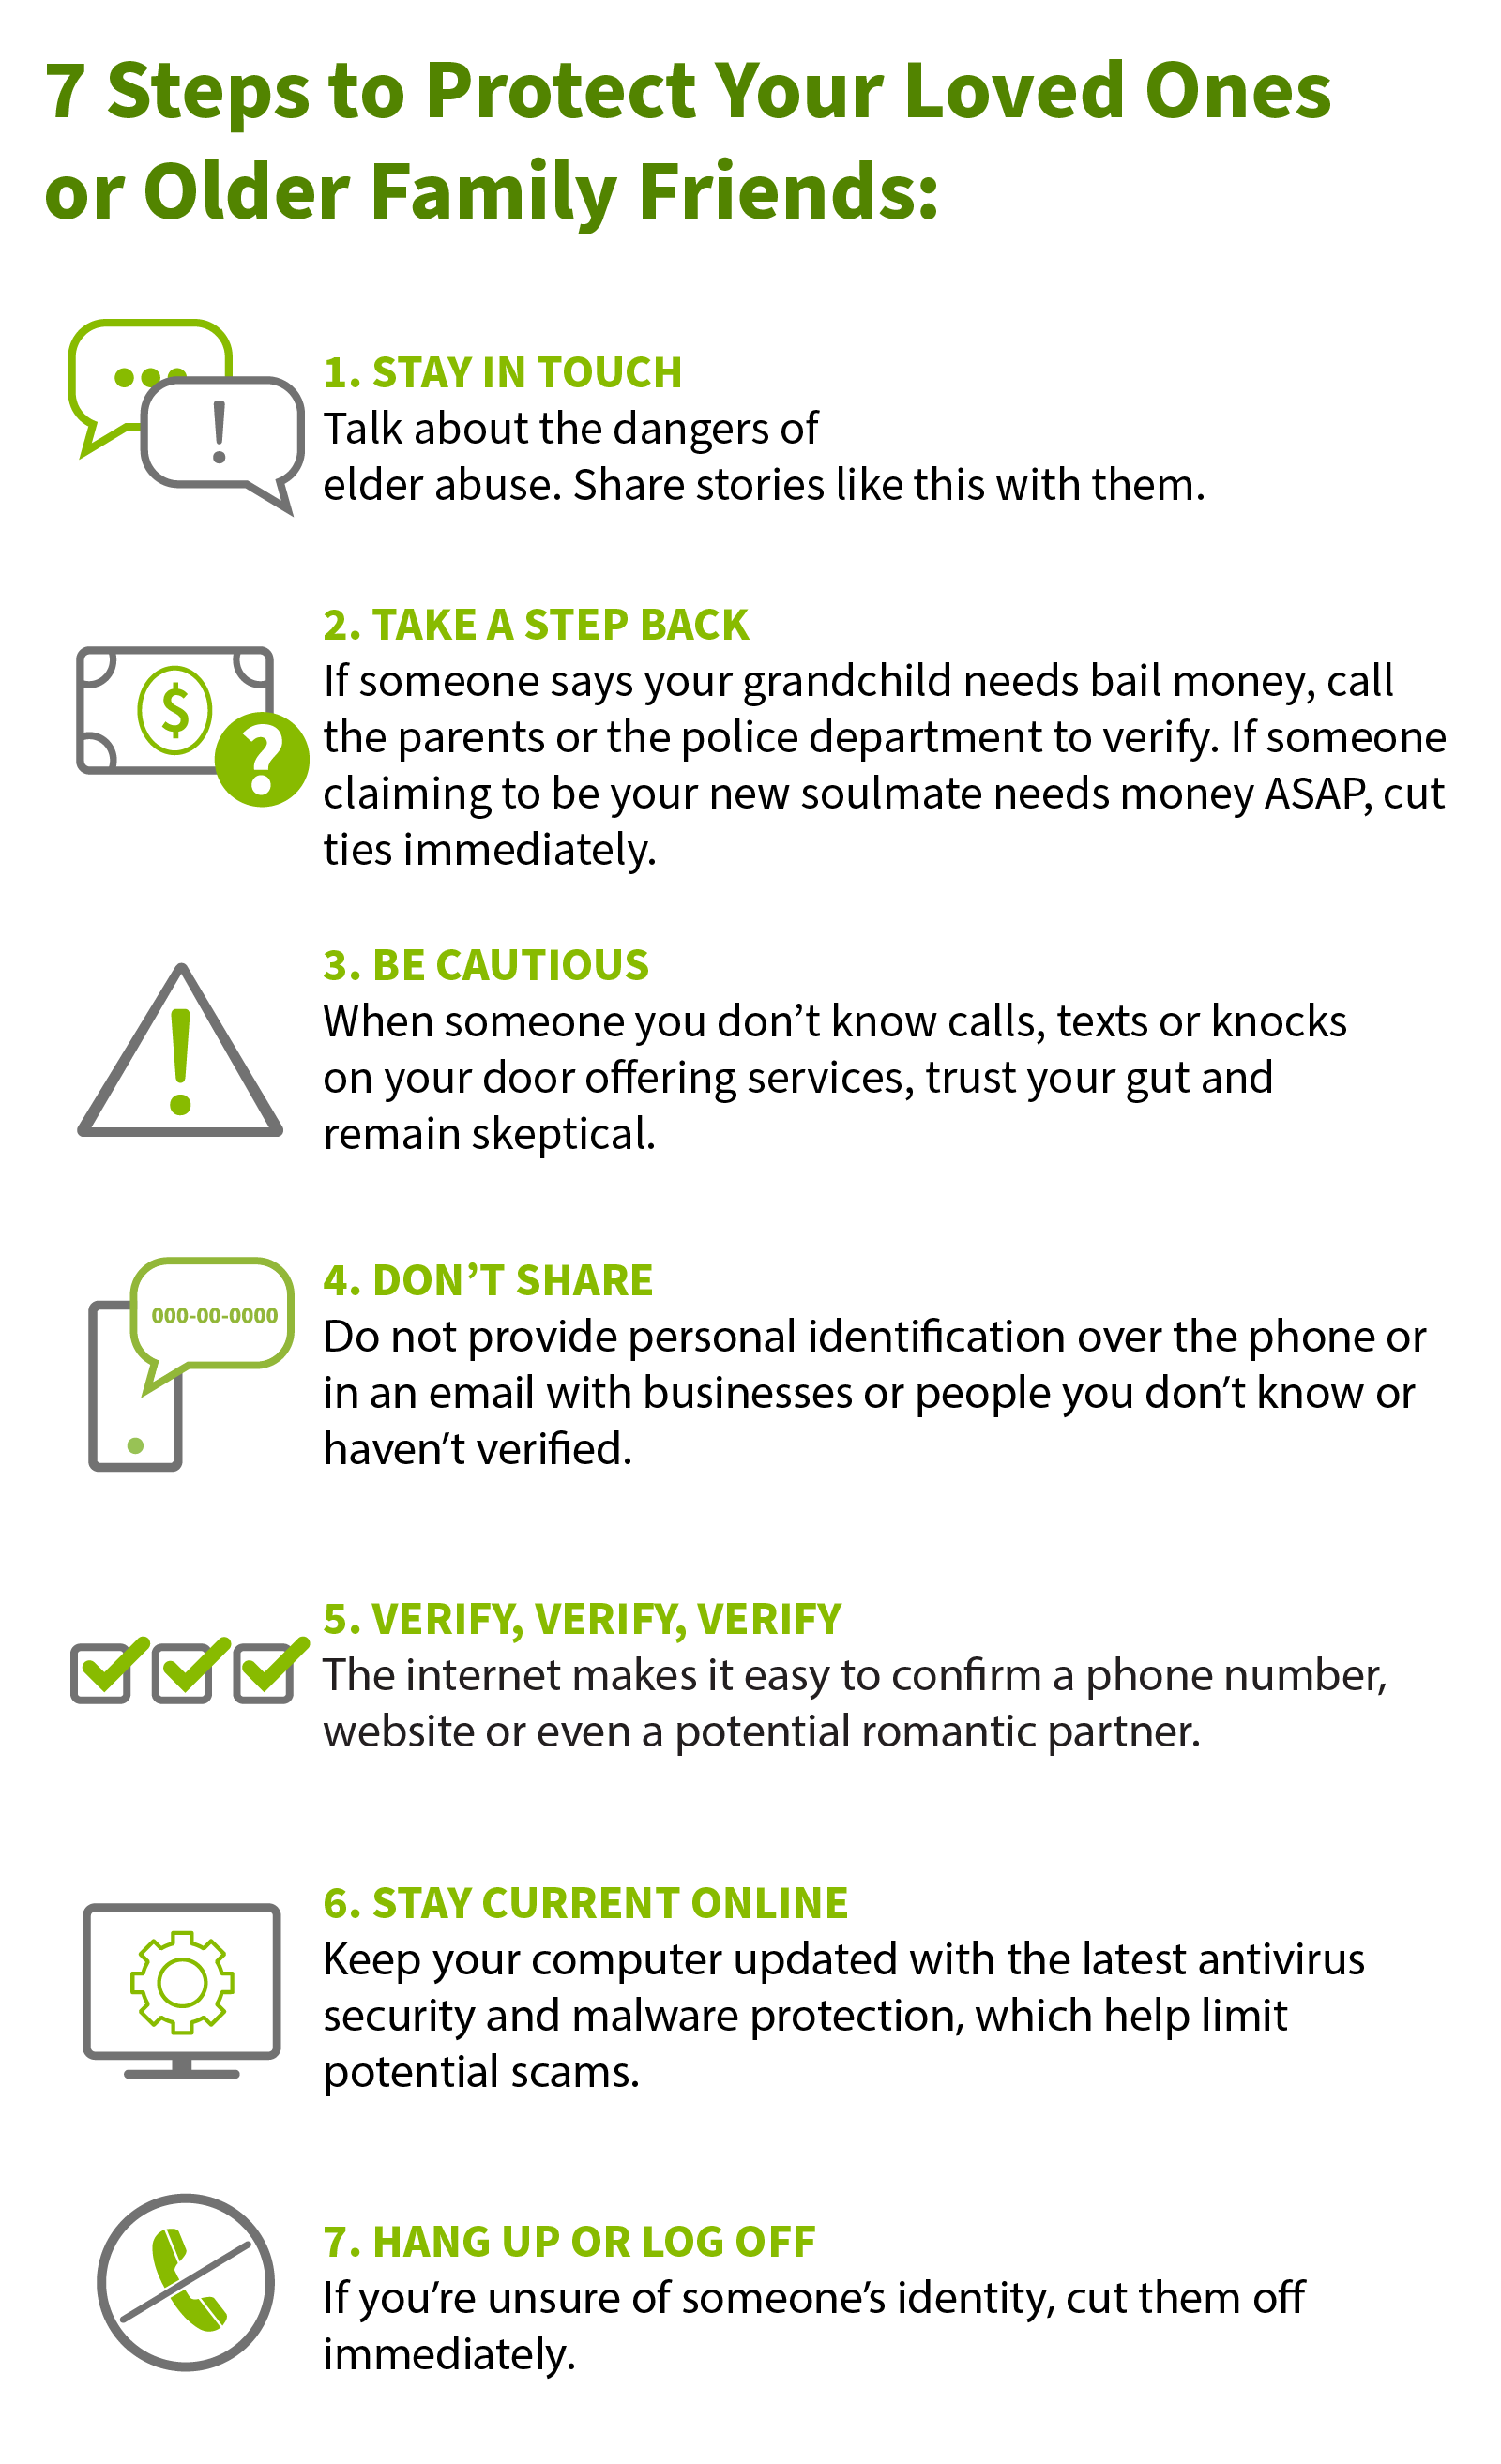 7 Steps to Fight Elder Fraud infographic, click for pdf